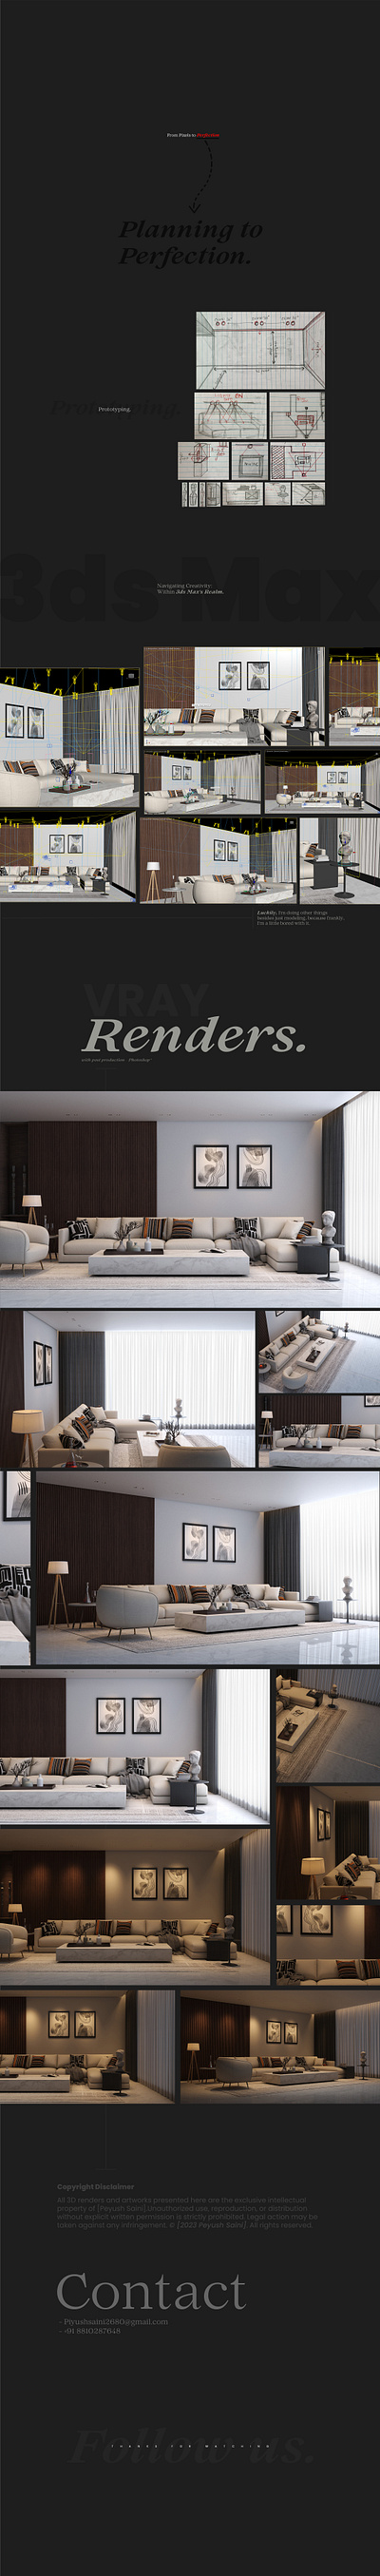 Photo-Realistic 3D Interior Renders using 3ds max + V-ray. 3d 3ds max ads of the world animation architecture artist branding corona creative ads design graphic design interior designing lighting modelling photo realistic renders prototyping sketching texturing visualization vray